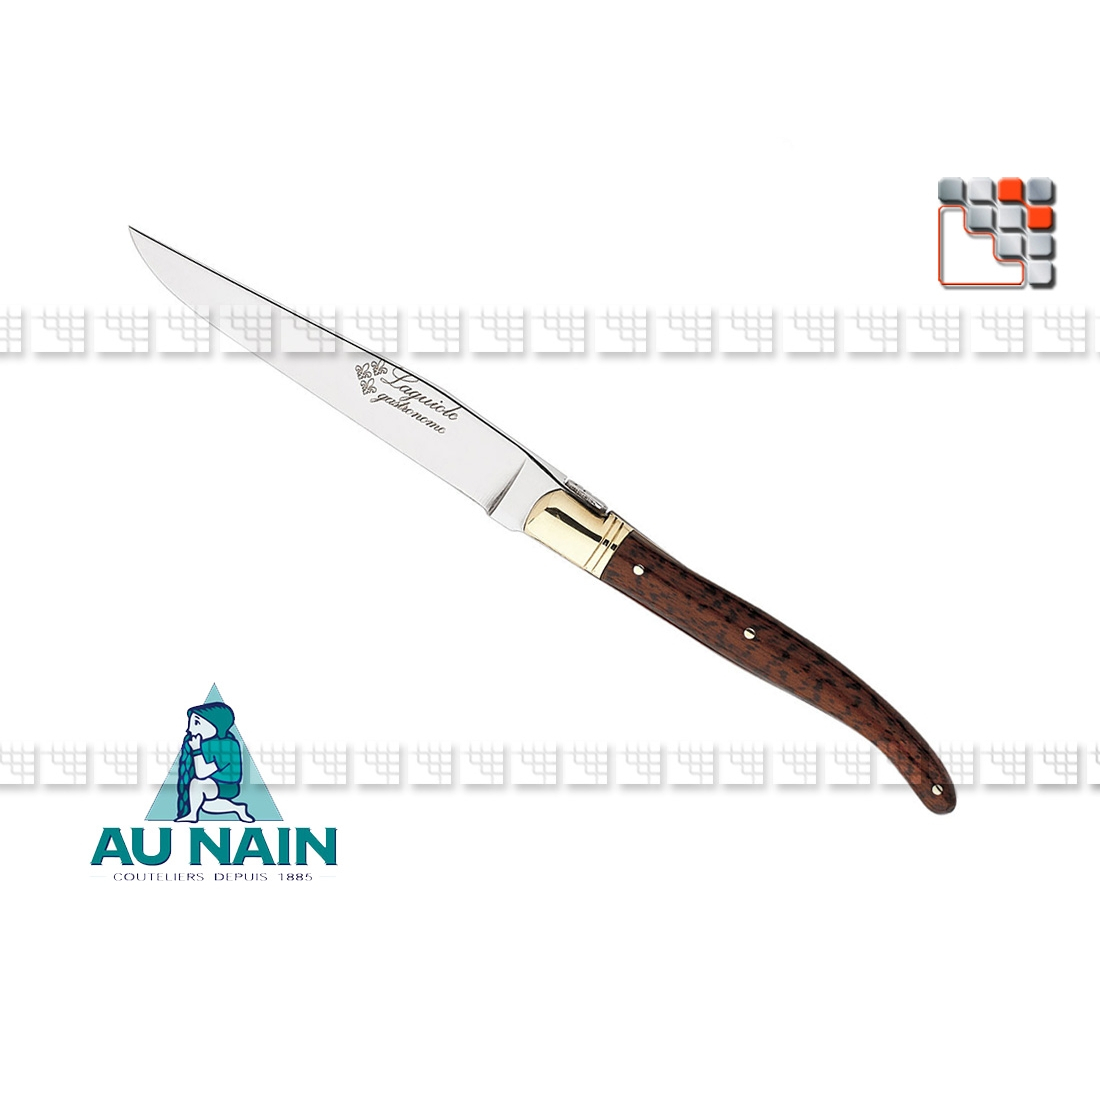 Laguiole table knife in snakewood AUNAIN A38-1903001 AU NAIN® Coutellerie Cutlery Tableware